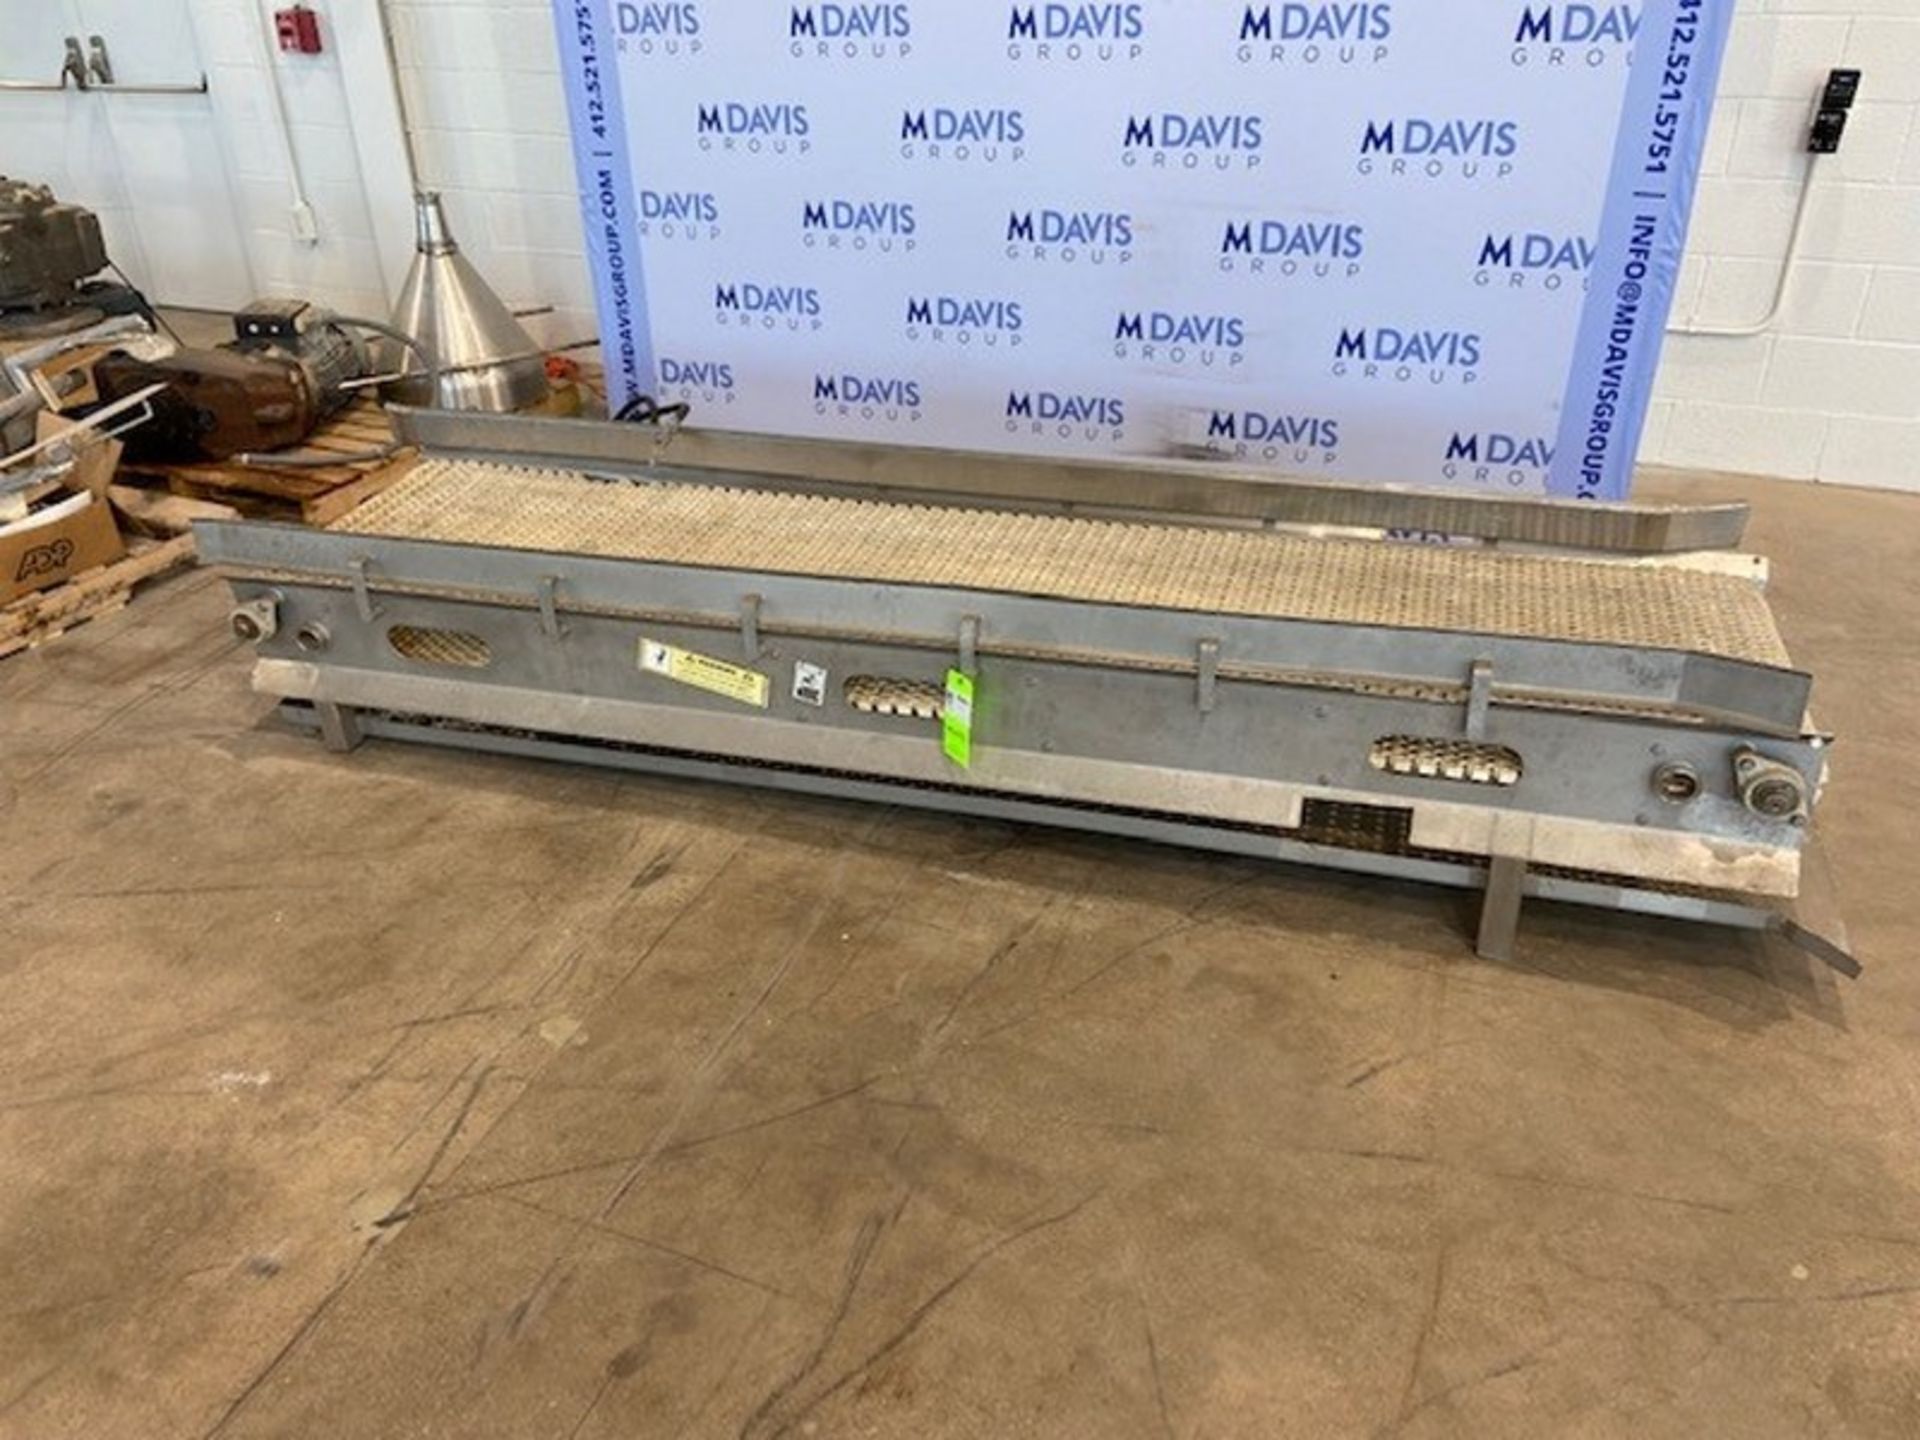 Straight Section of Conveyor,Aprox. 114" L, with Aprox. 24" W Plastic Interlock Belt,